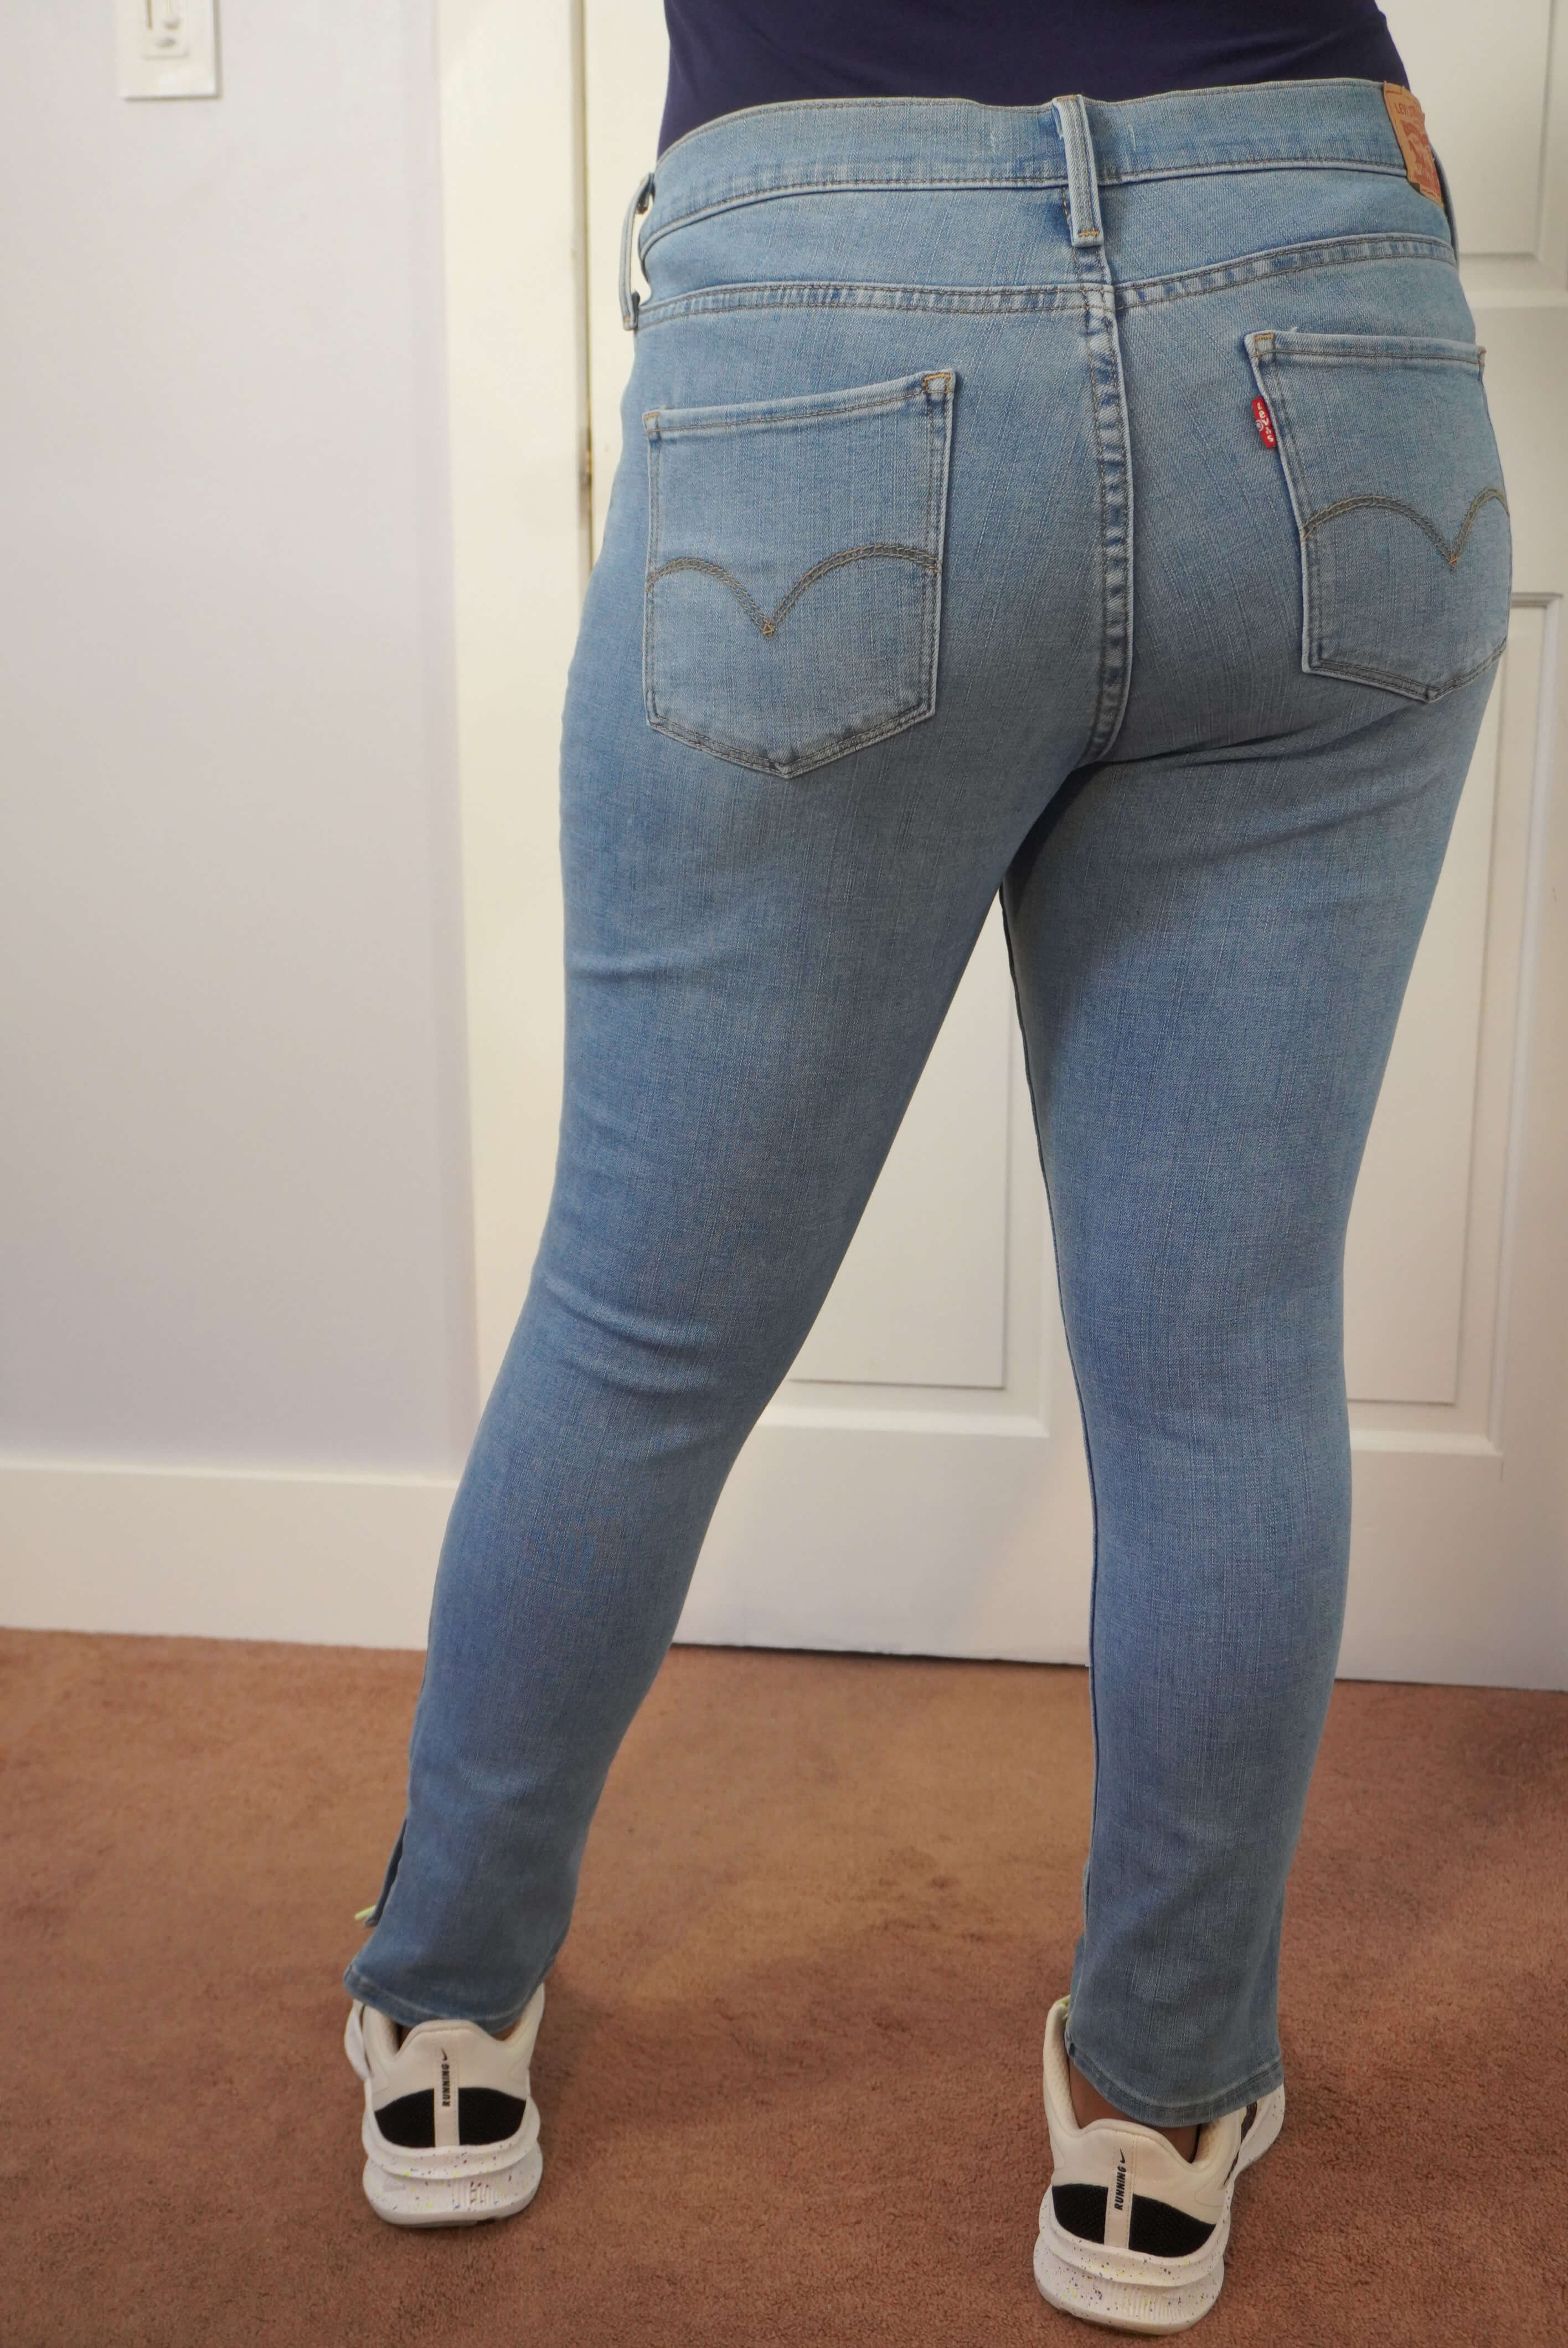 This image shows the back view of a pair of Levi's 311 skinny shaping on the author. The back pockets and tight fit of the jeans are displayed.